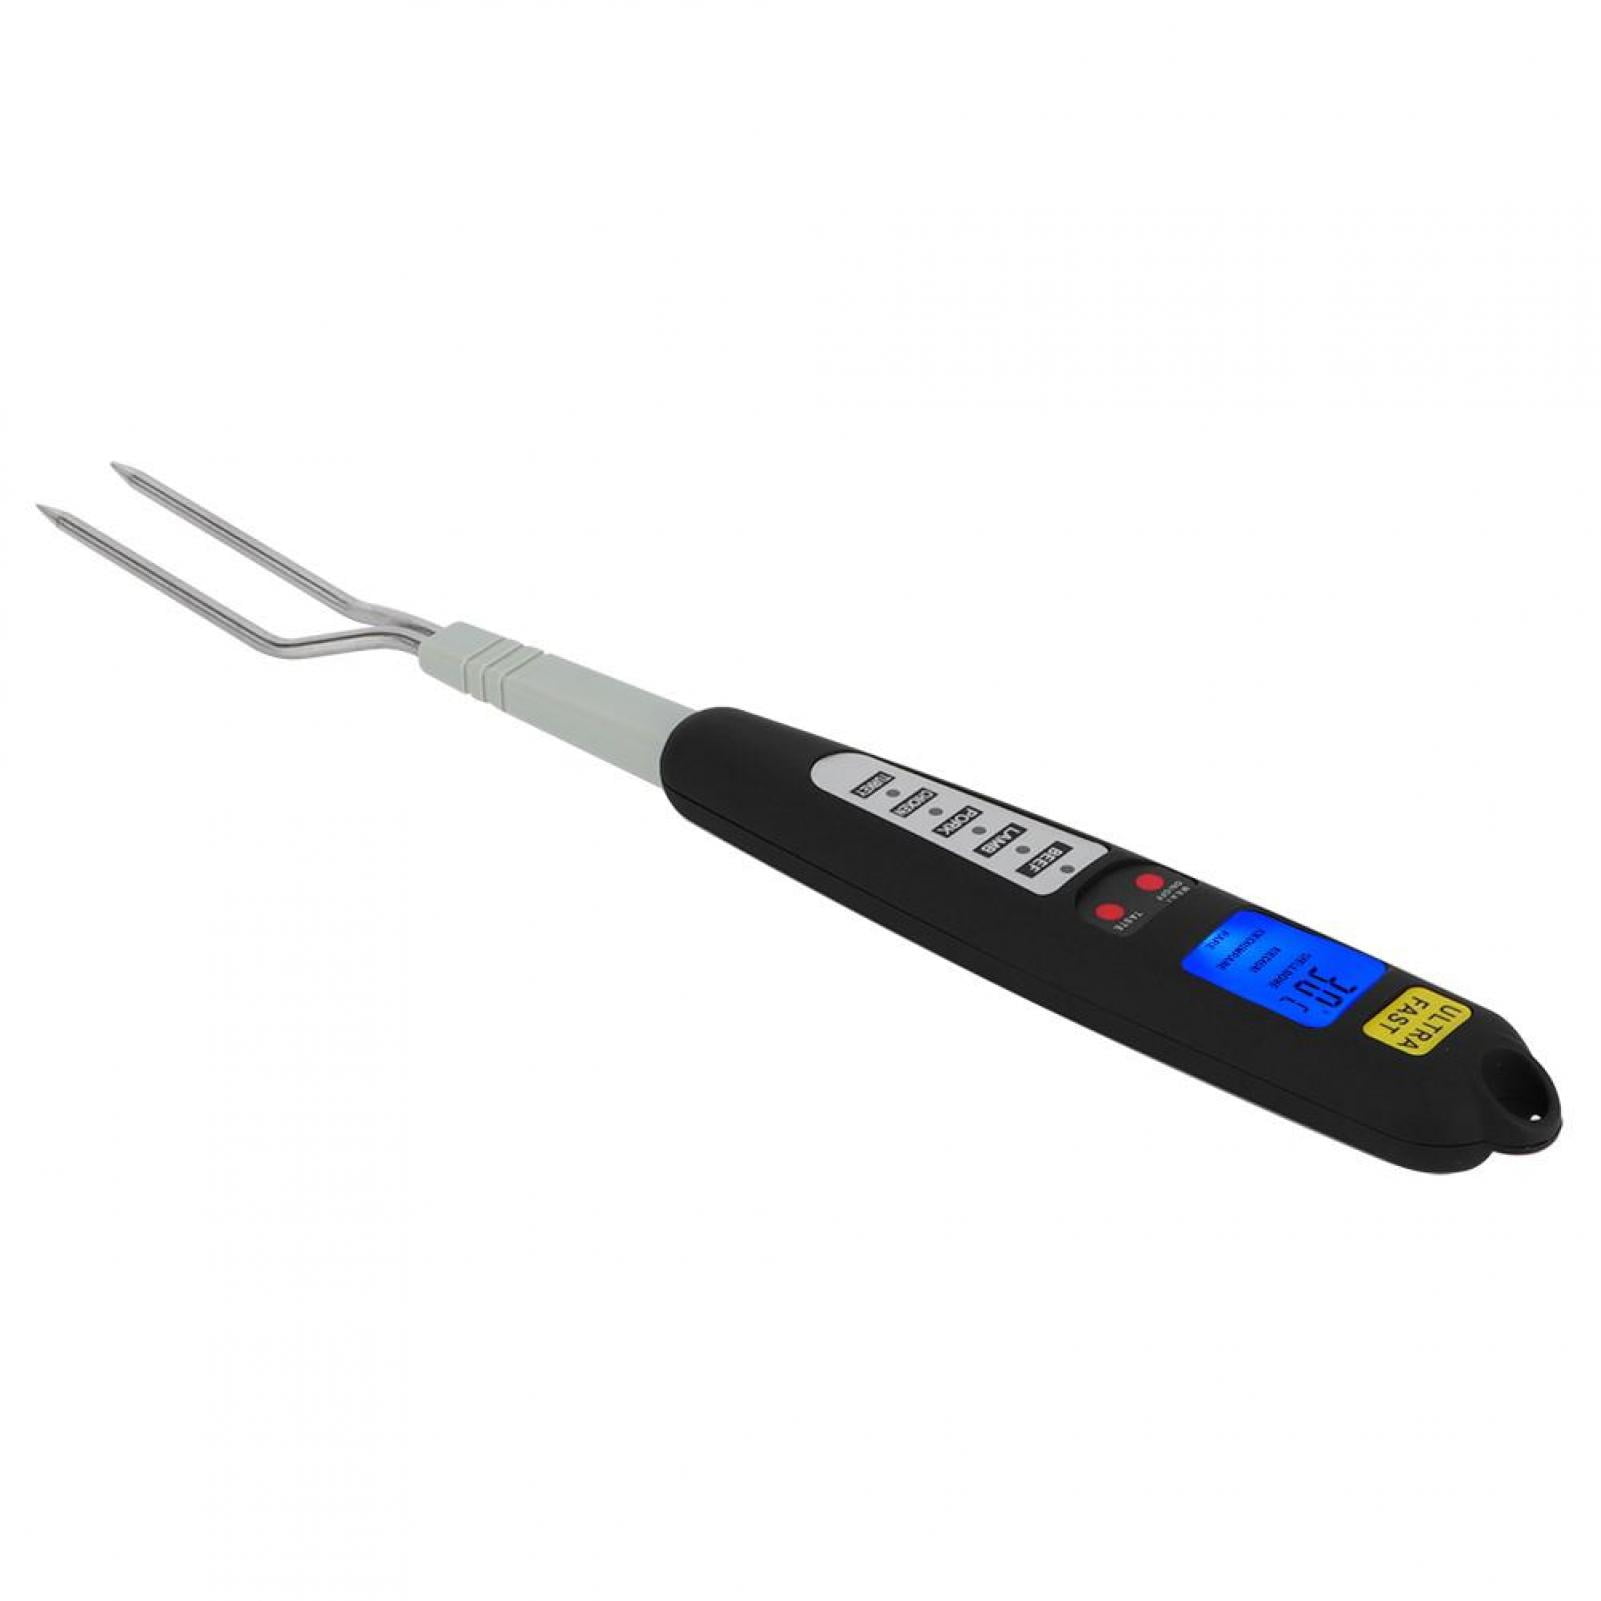 Details about   GrillPro Deluxe Meat Fork with LED Readout Display 13850 New 